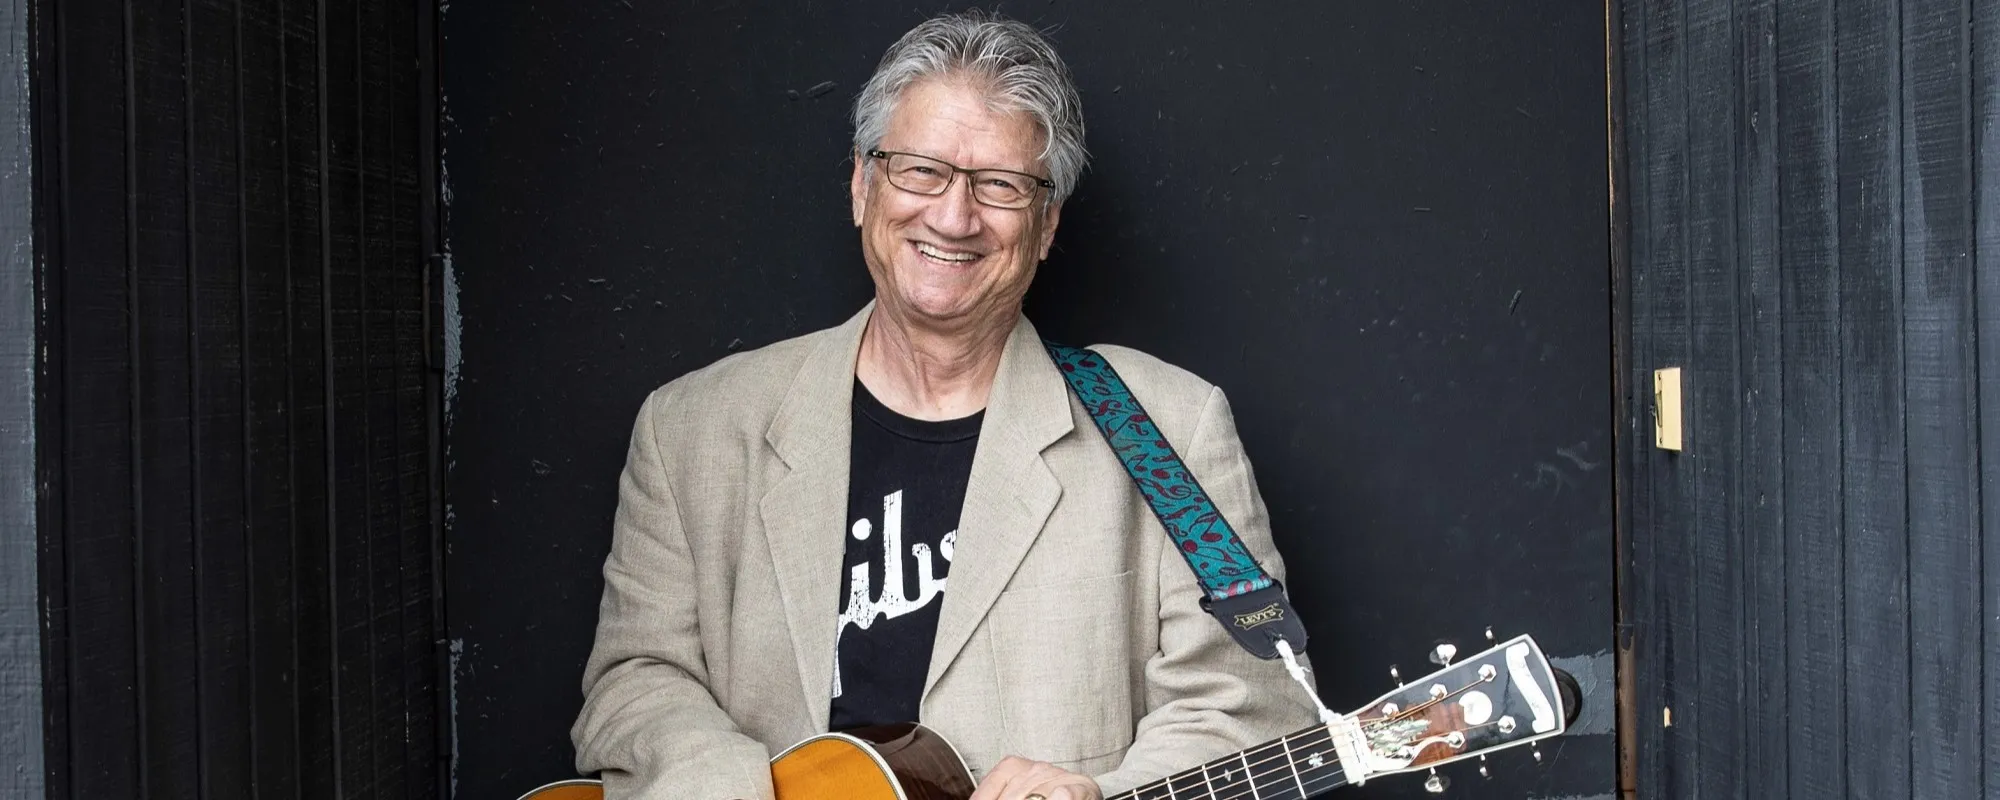 5 Great Songs by Buffalo Springfield/Poco Co-Founder Richie Furay